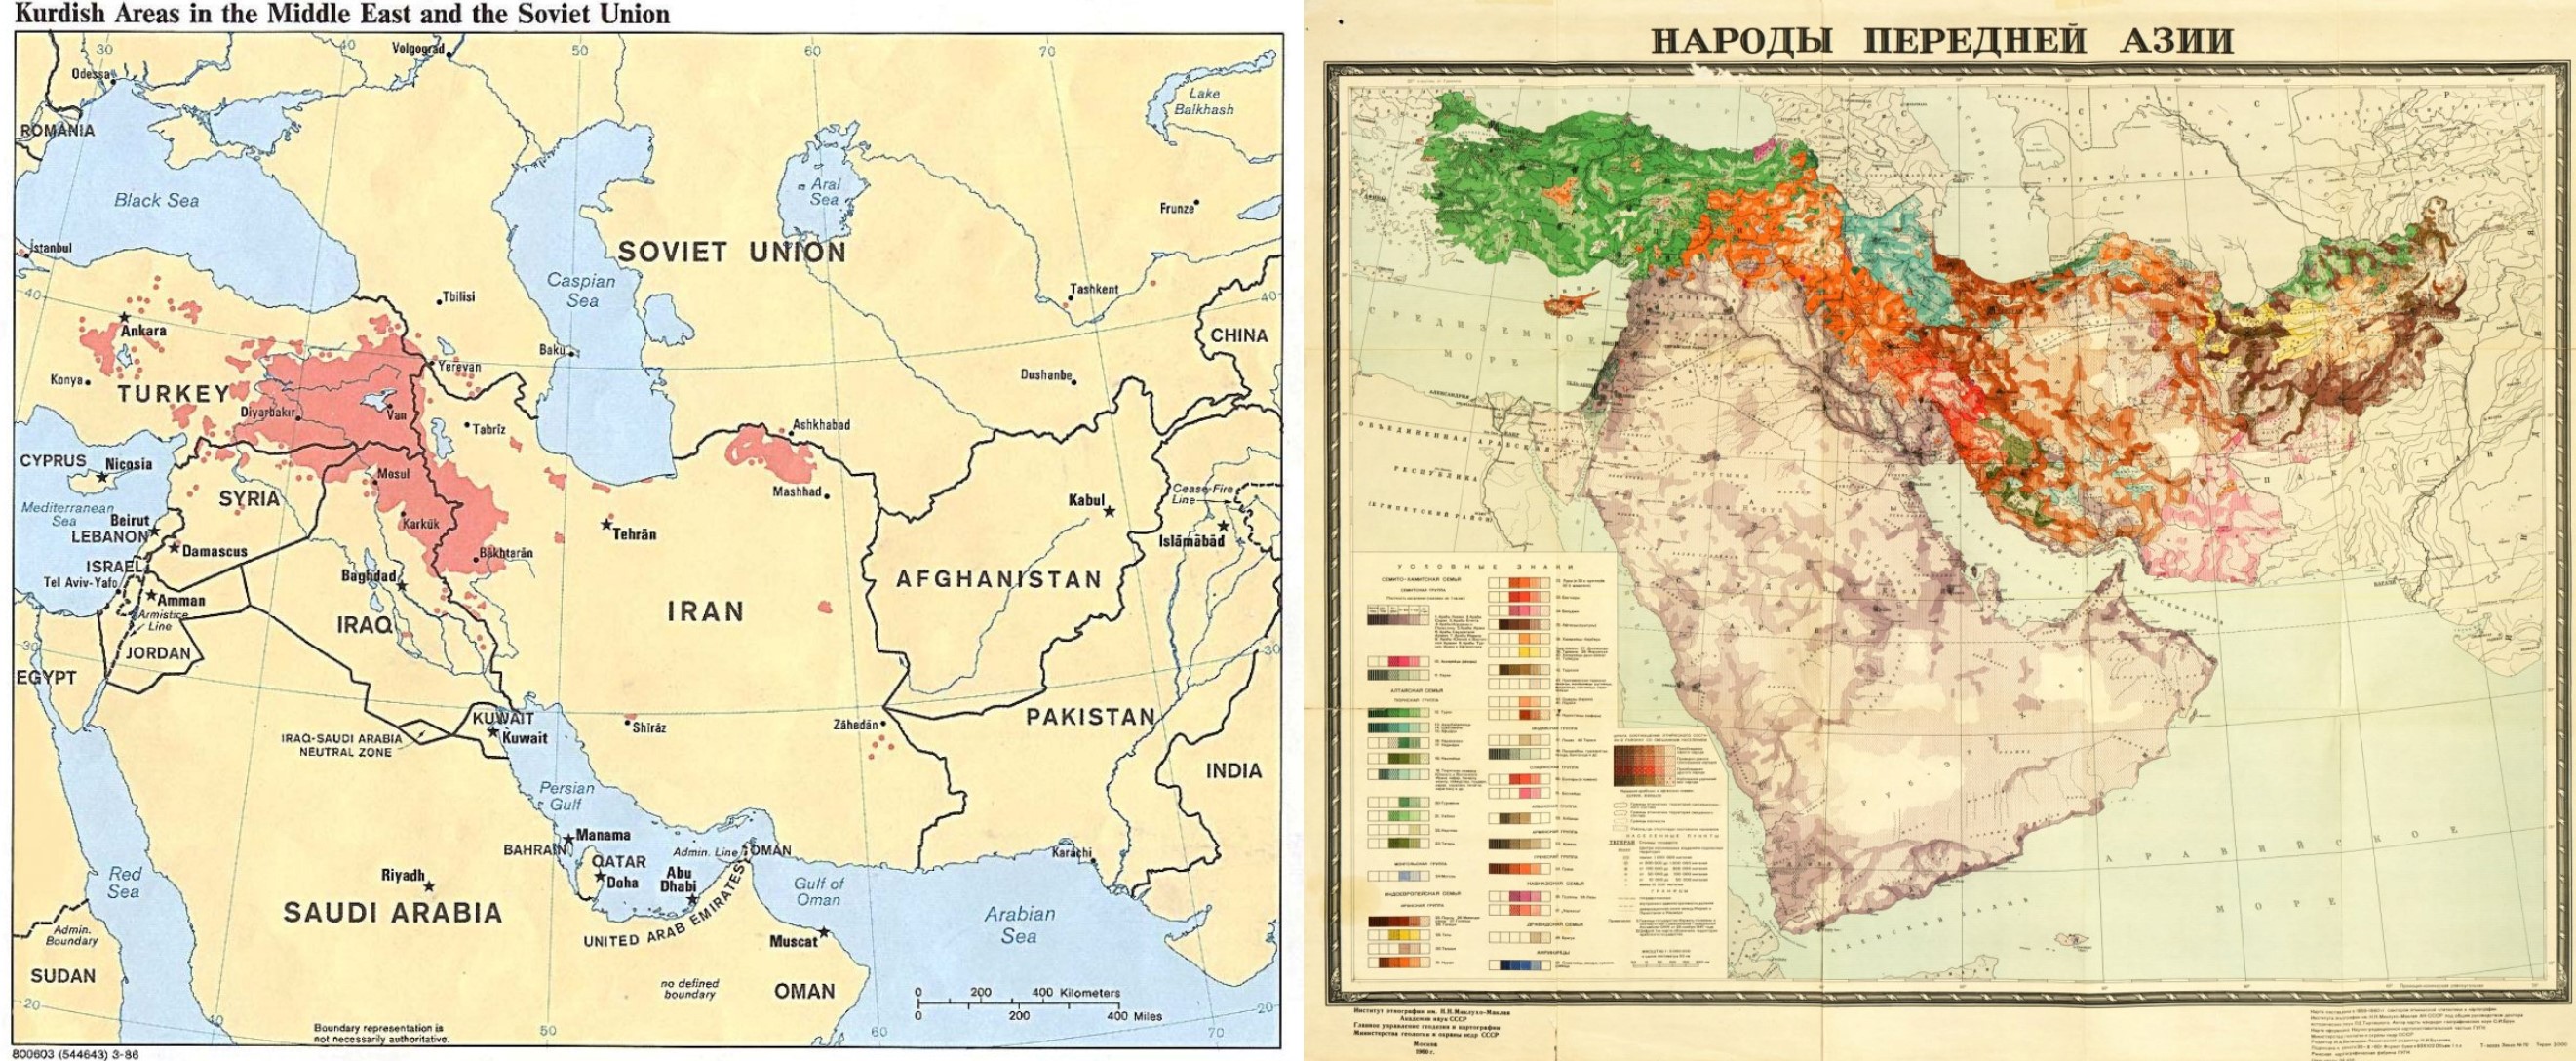 On the left, 1986 CIA map of Kurdish-inhabited areas. On the right, 1960 Soviet ethnographic map of the Near East with Kurdish populations in orange.